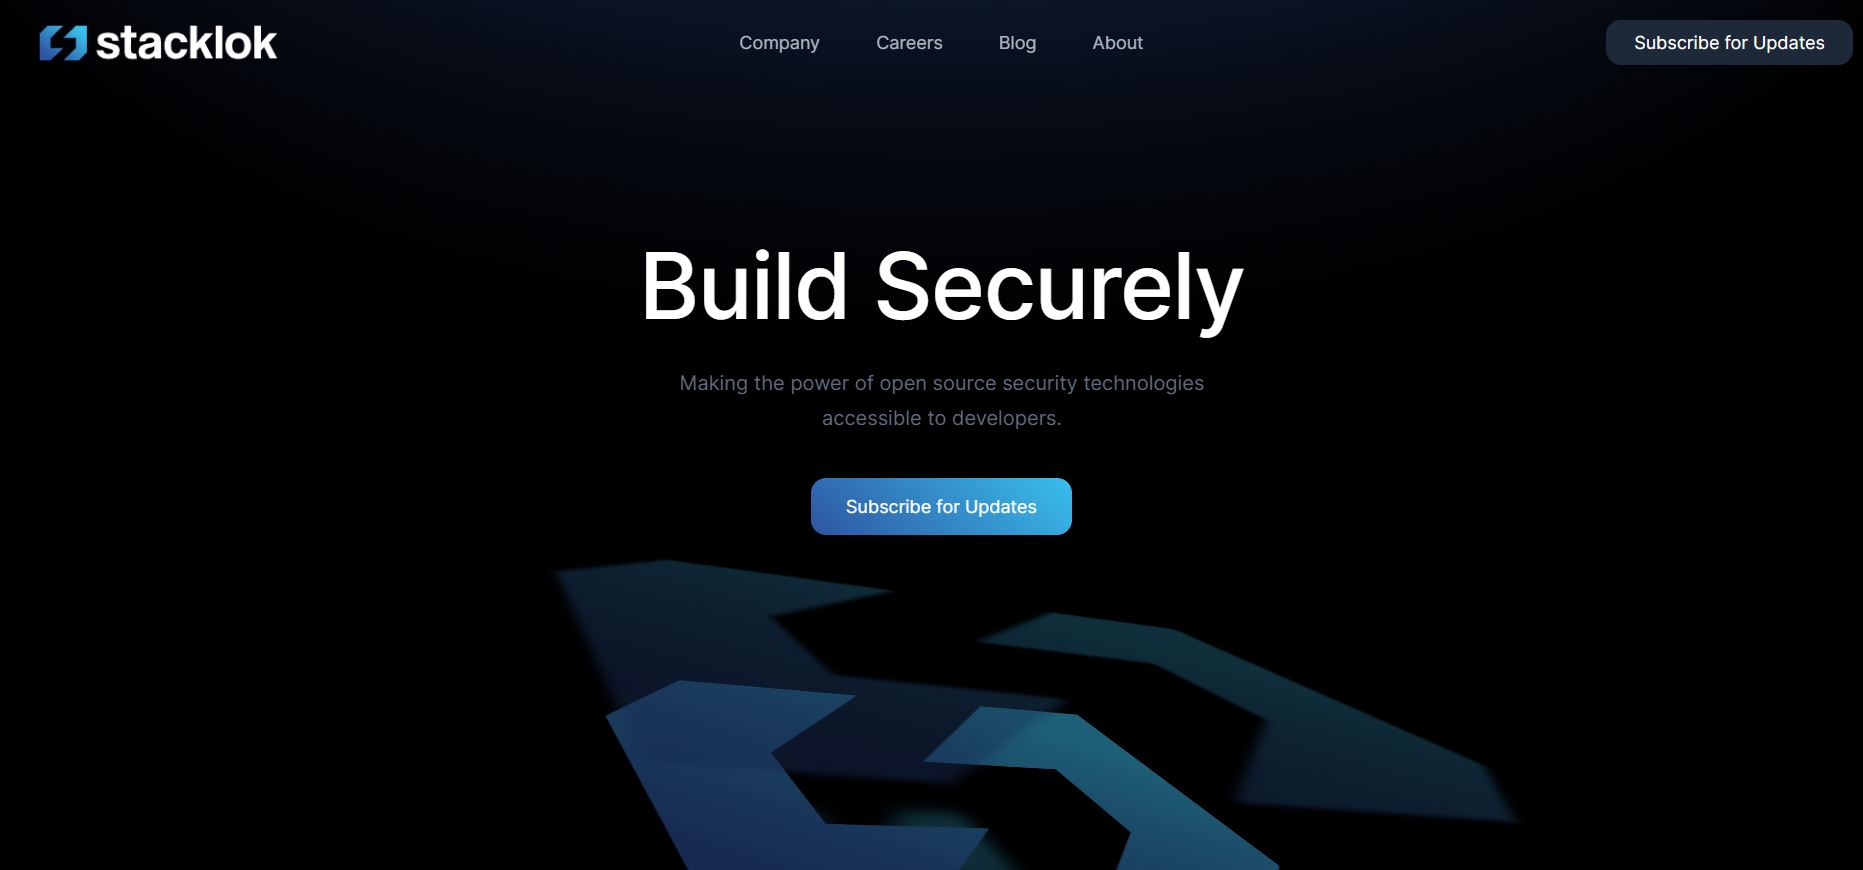 With an impressive $17.5M raised and visionary, Stacklok at the helm, we are revolutionizing the way developers build securely